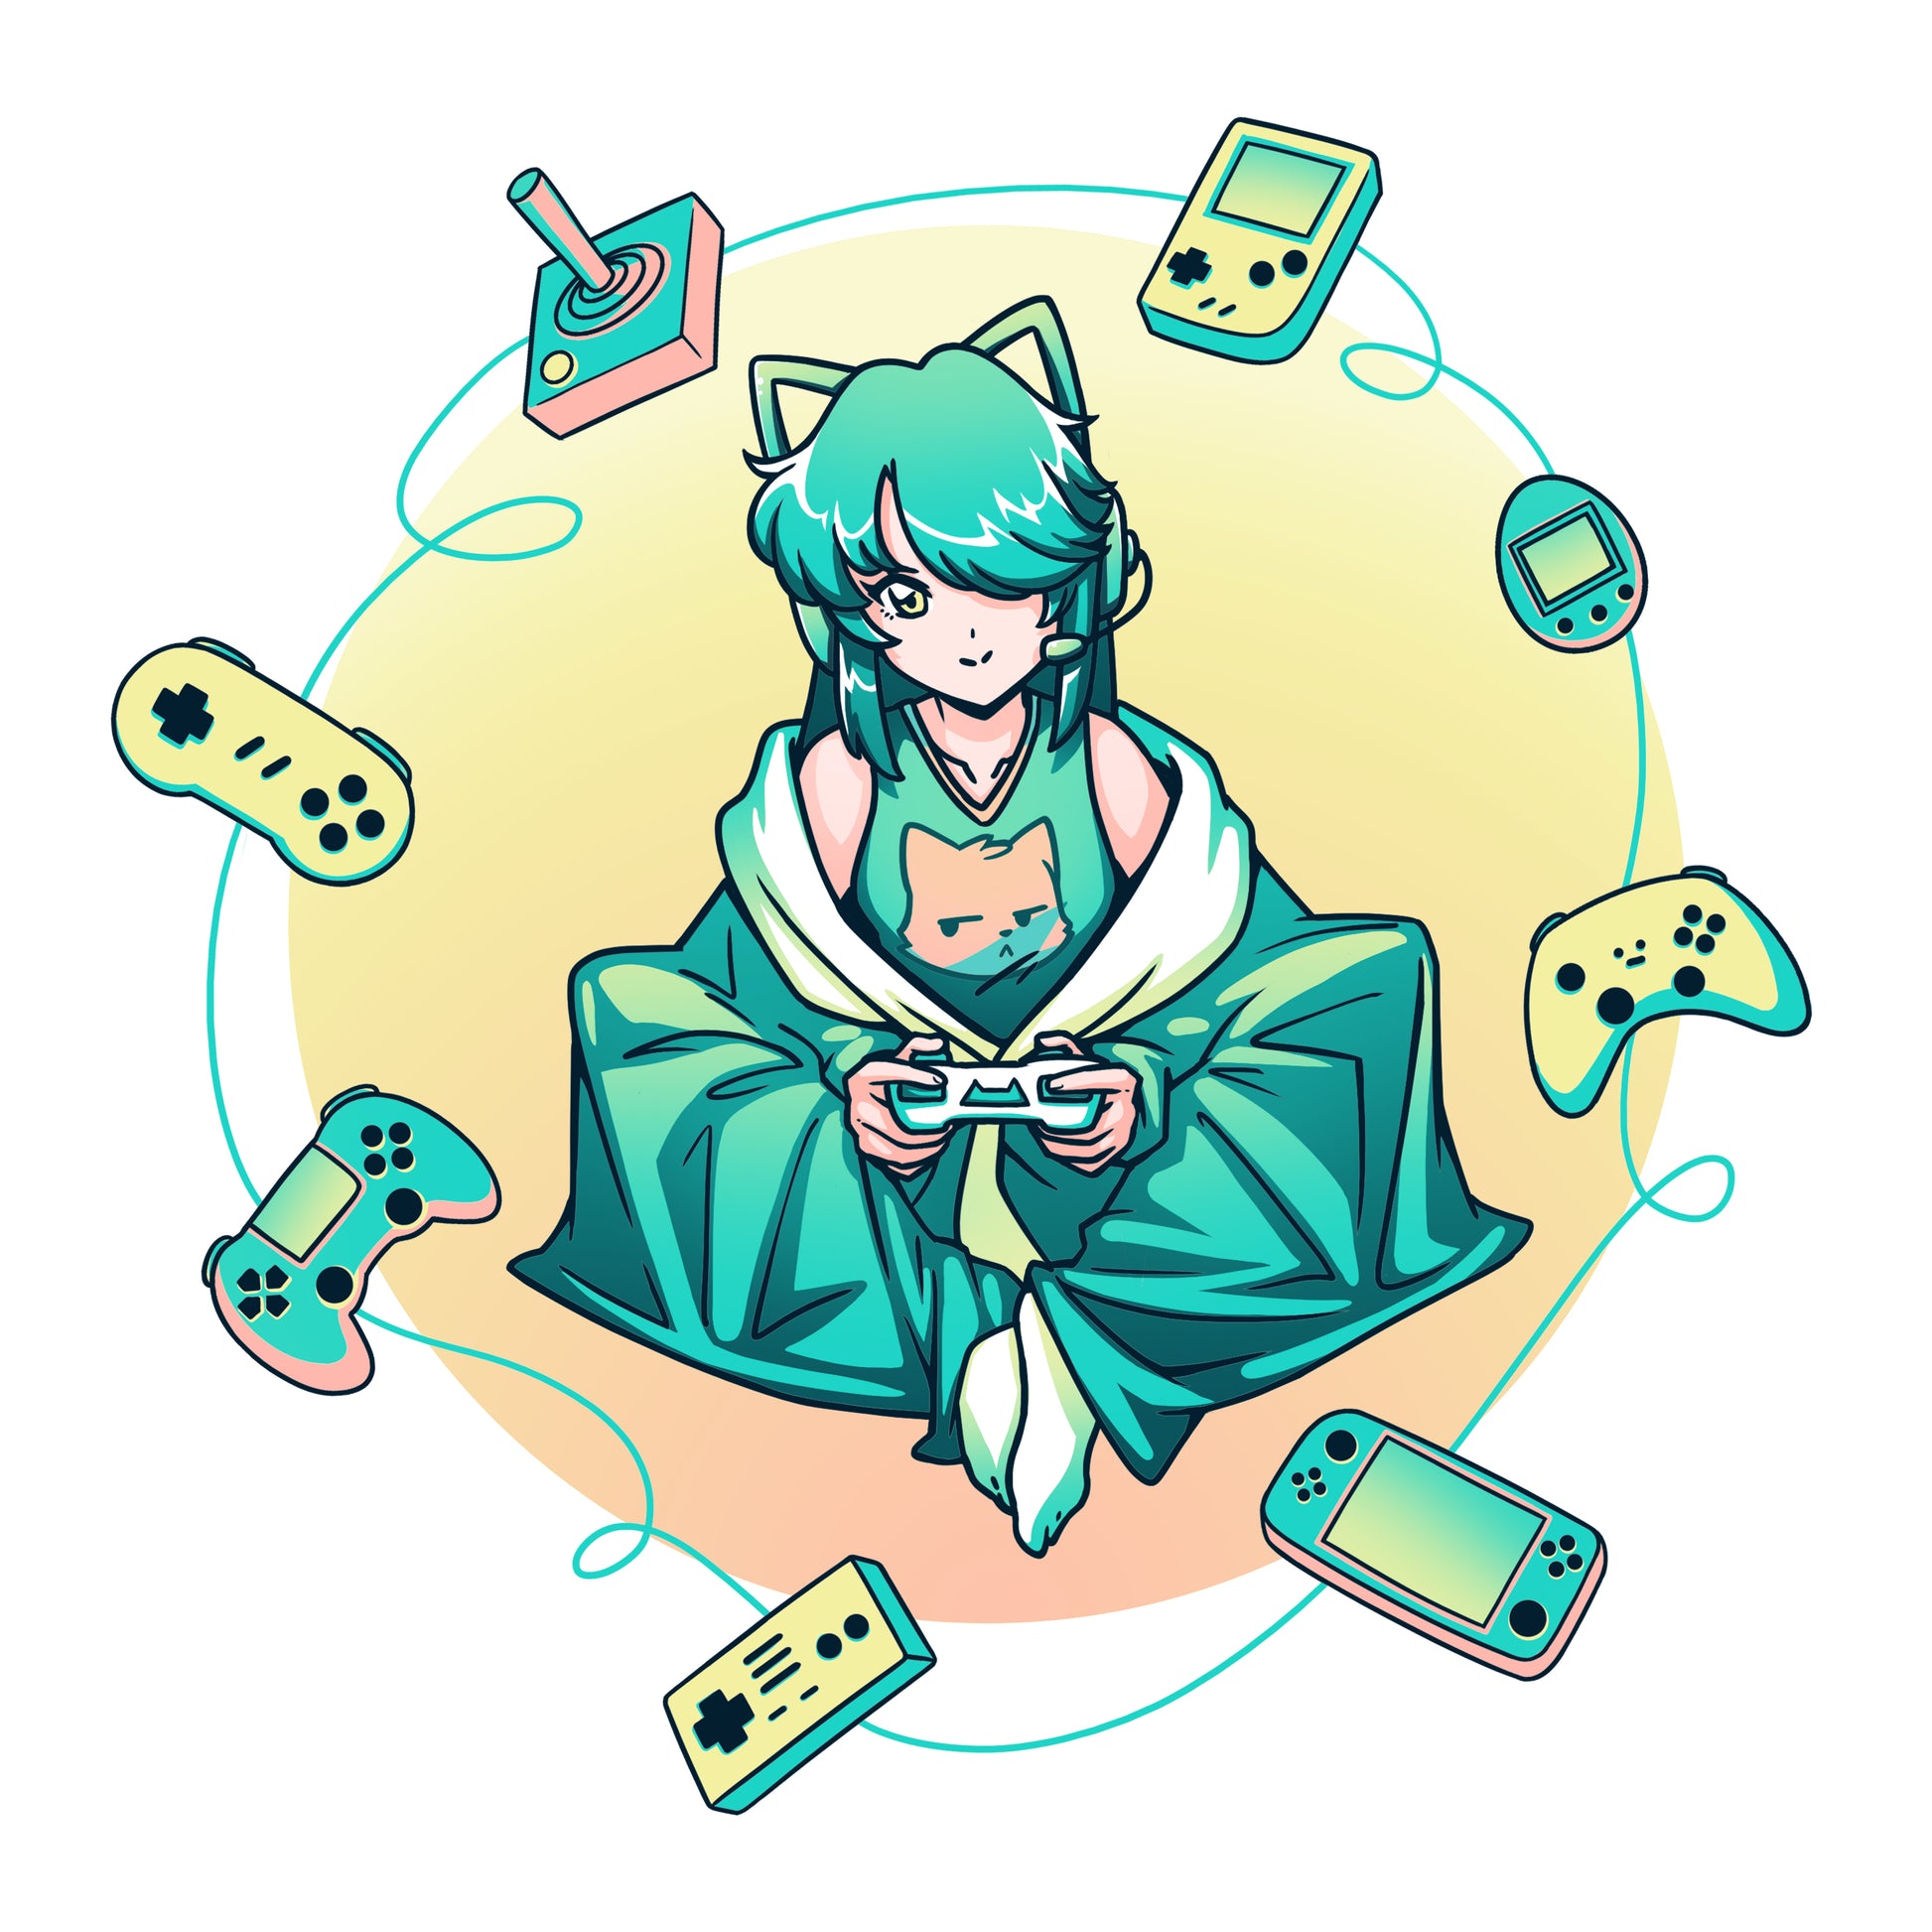 Anime-style character with teal hair and cat ears sitting while holding a game controller, surrounded by various gaming devices and accessories. She's wearing a Cozy Gamer Girl t-shirt made of super soft ringspun cotton from monsterdigital.